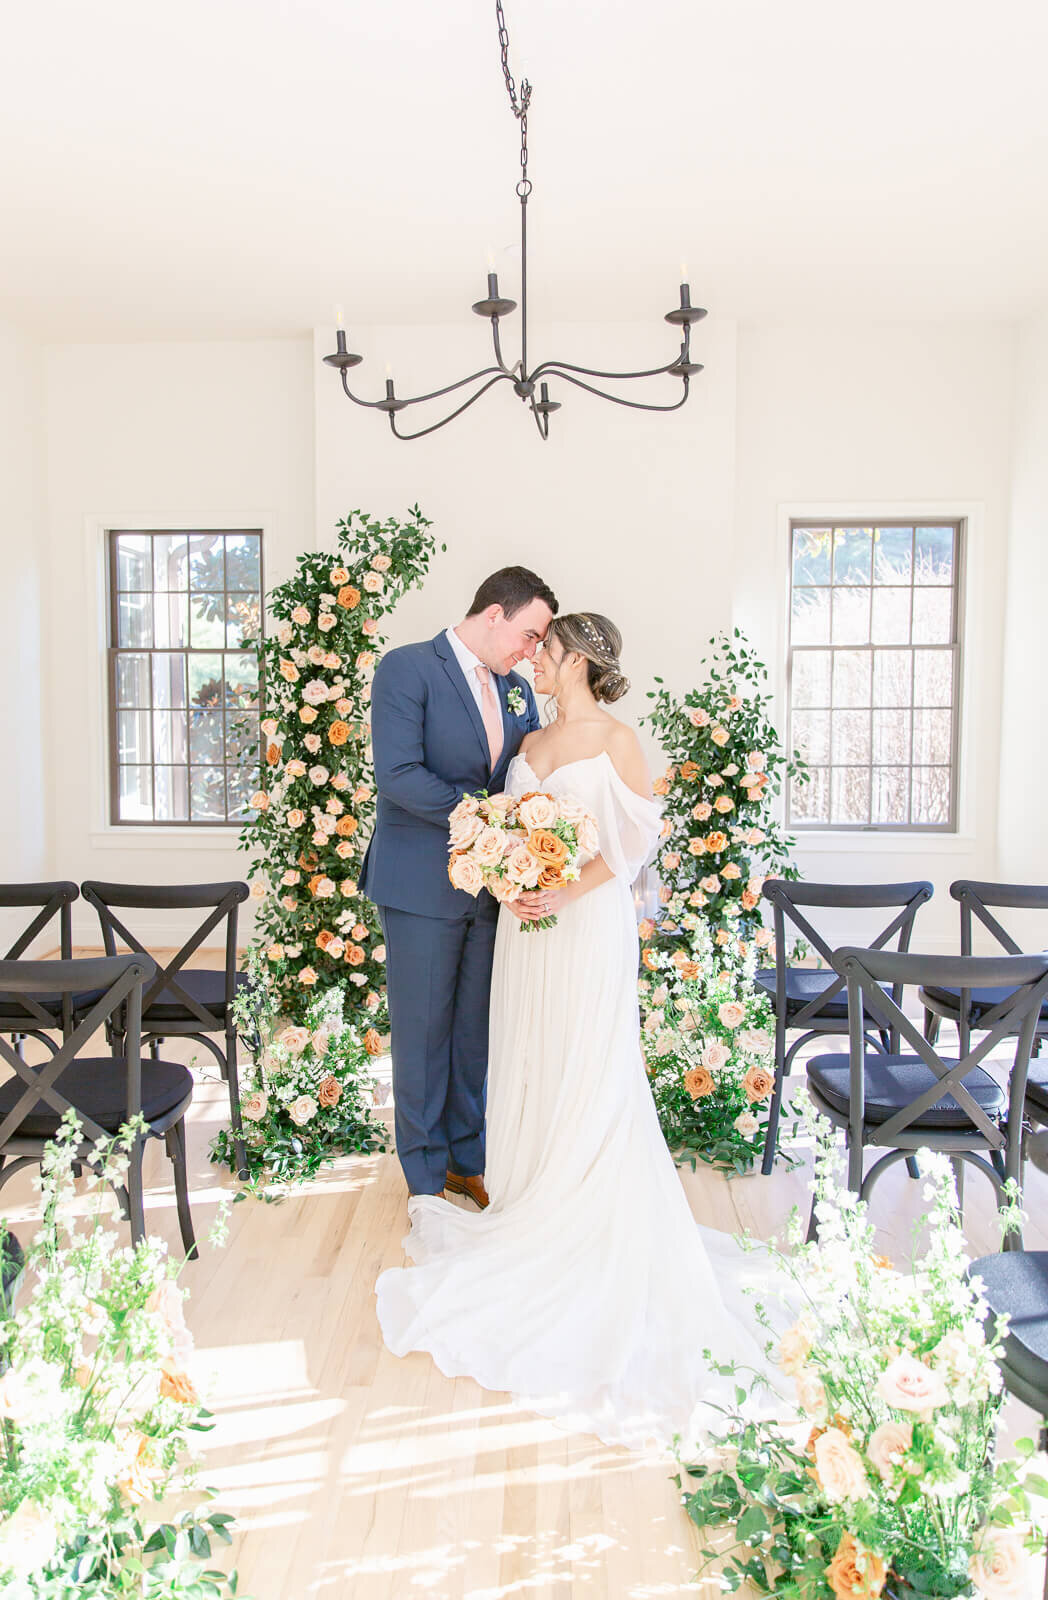 Bride and Groom gaze into each other's eyes during wedding portraits at a modern Virginia wedding venue in Loudon County. Taken by Bethany Aubre Photography.